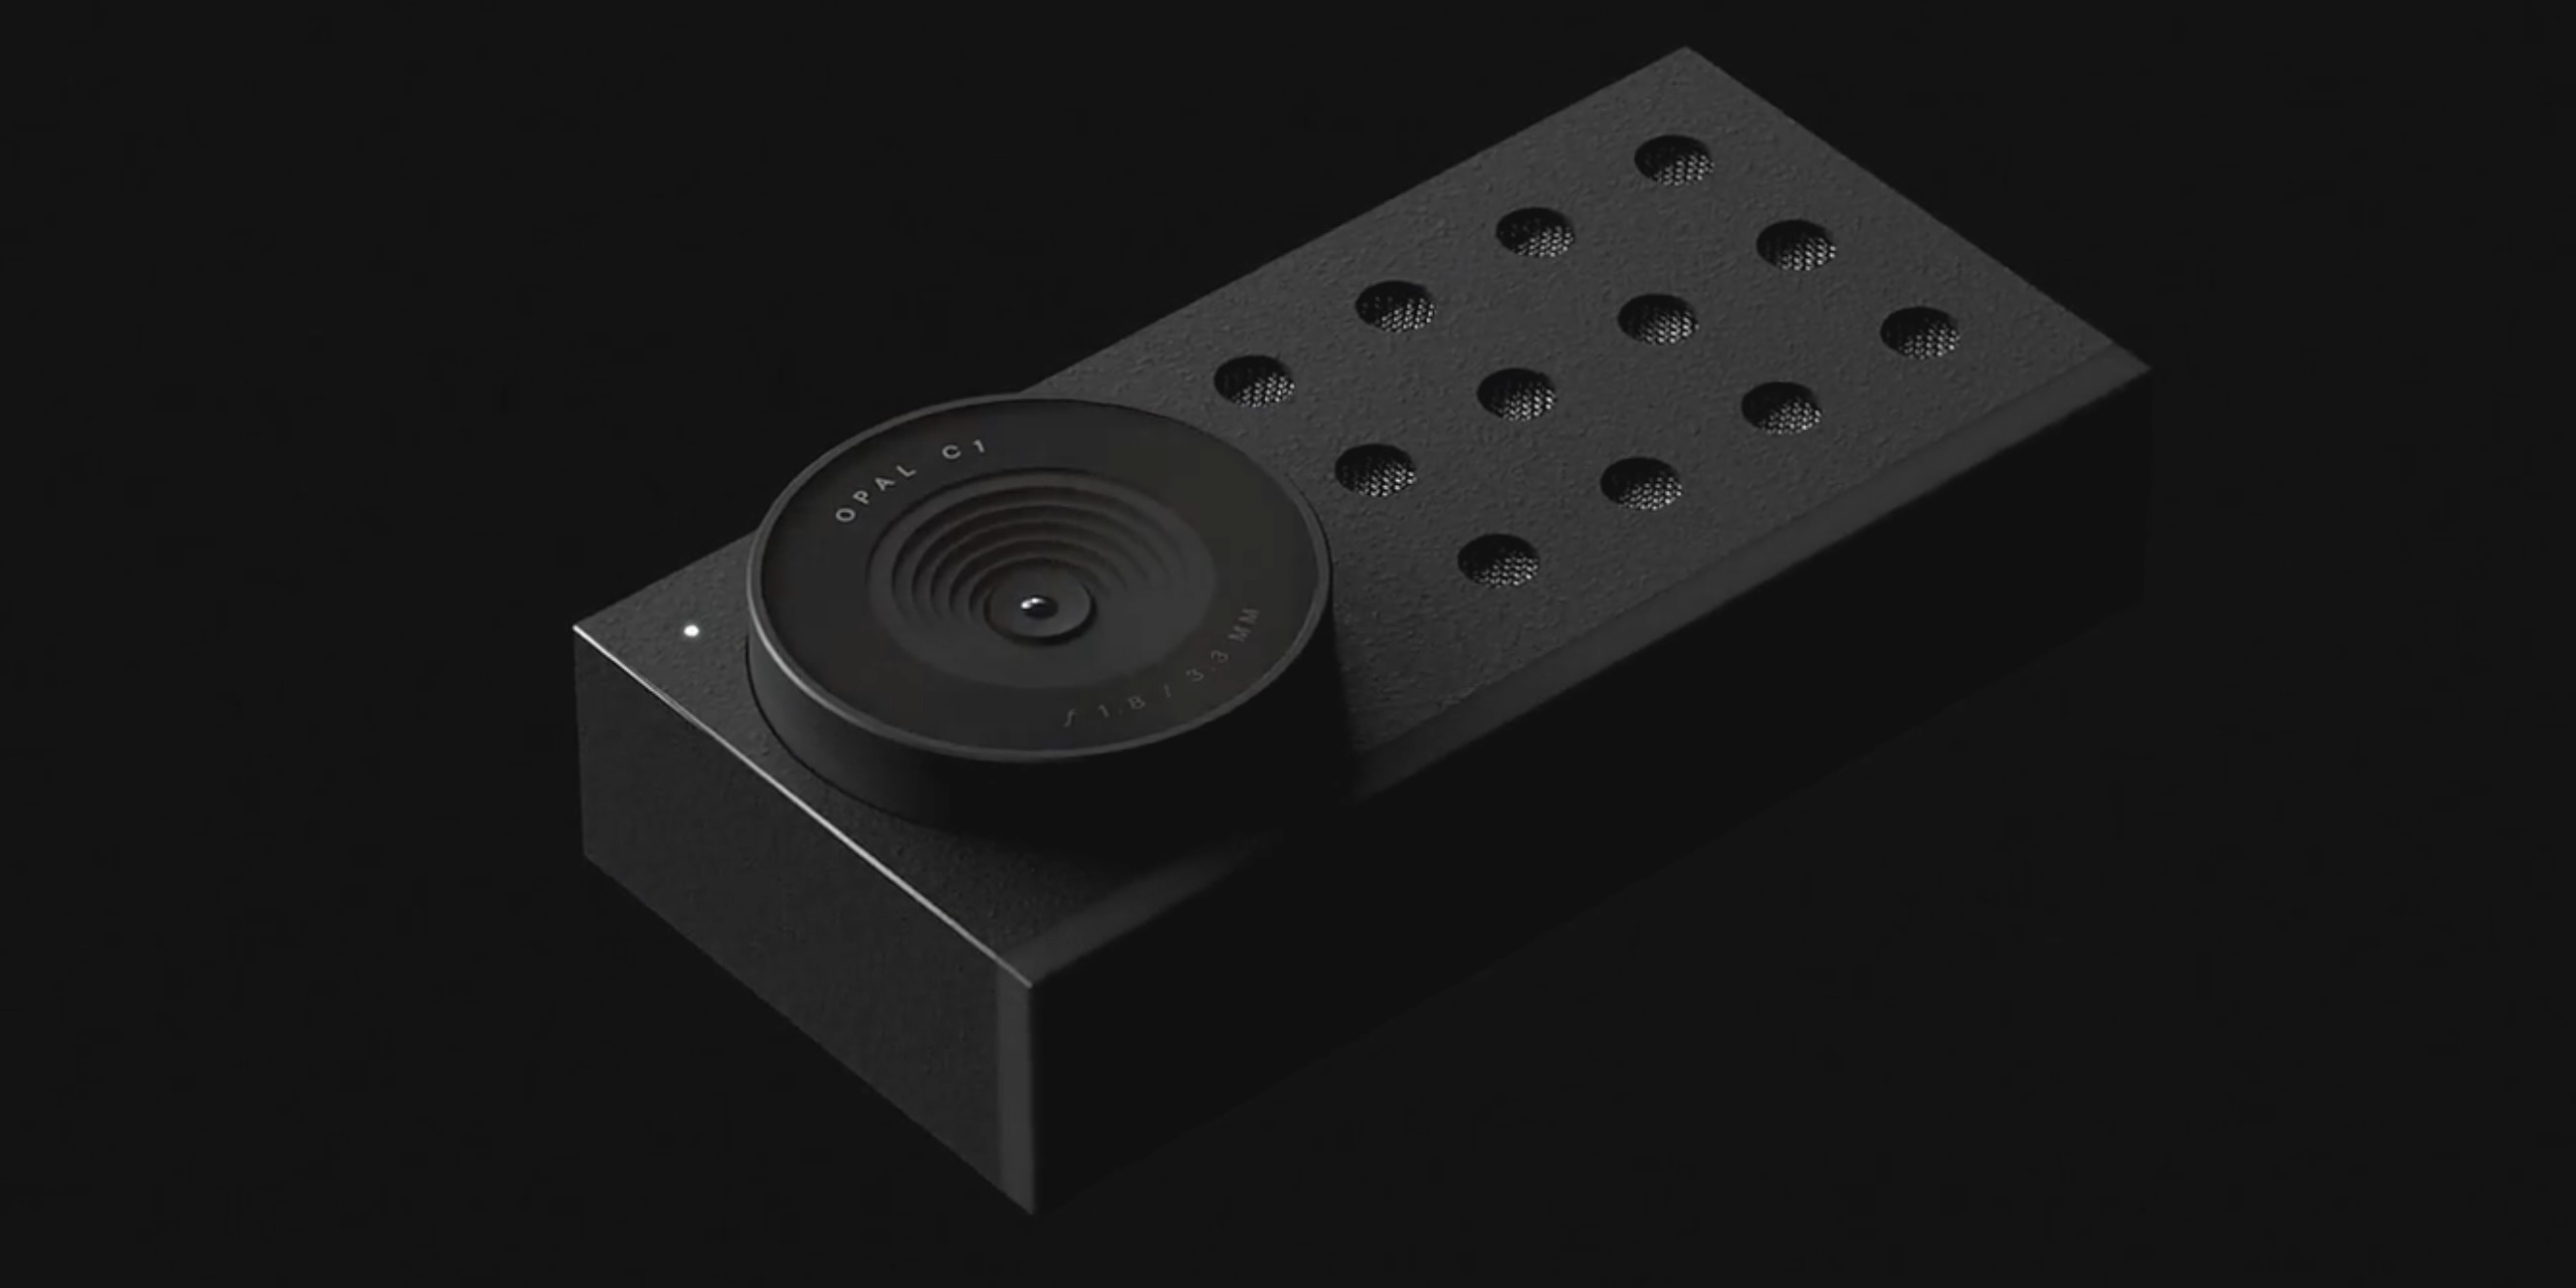 Former Apple and Beats designers launch powerful 4K webcam designed for Mac  - 9to5Mac